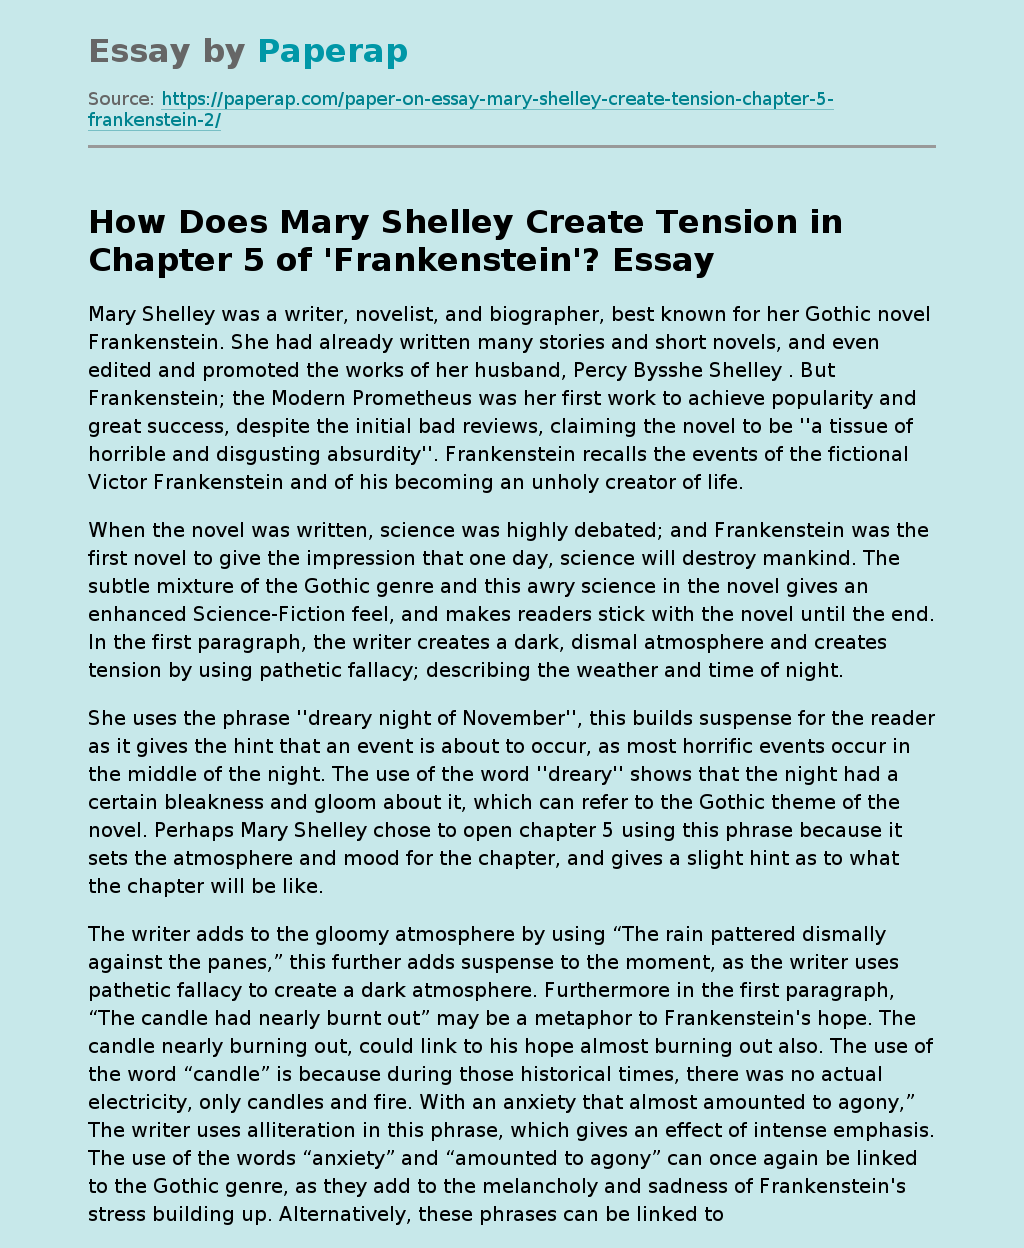 How Does Mary Shelley Create Tension in Chapter 5 of &#039;Frankenstein&#039;?